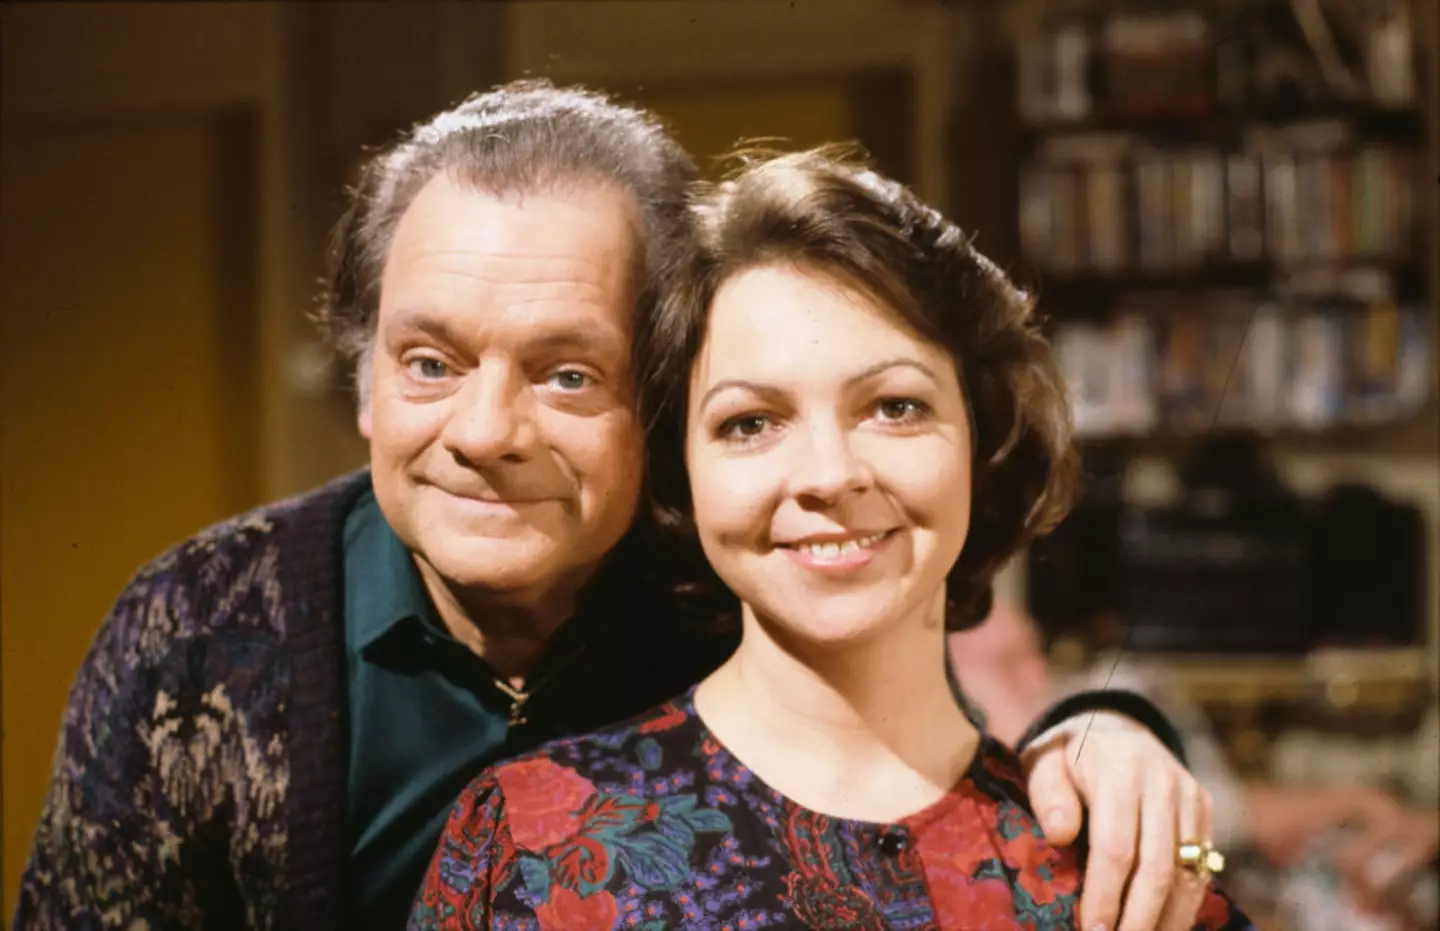 Del Boy and Raquel on Only Fools and Horses.